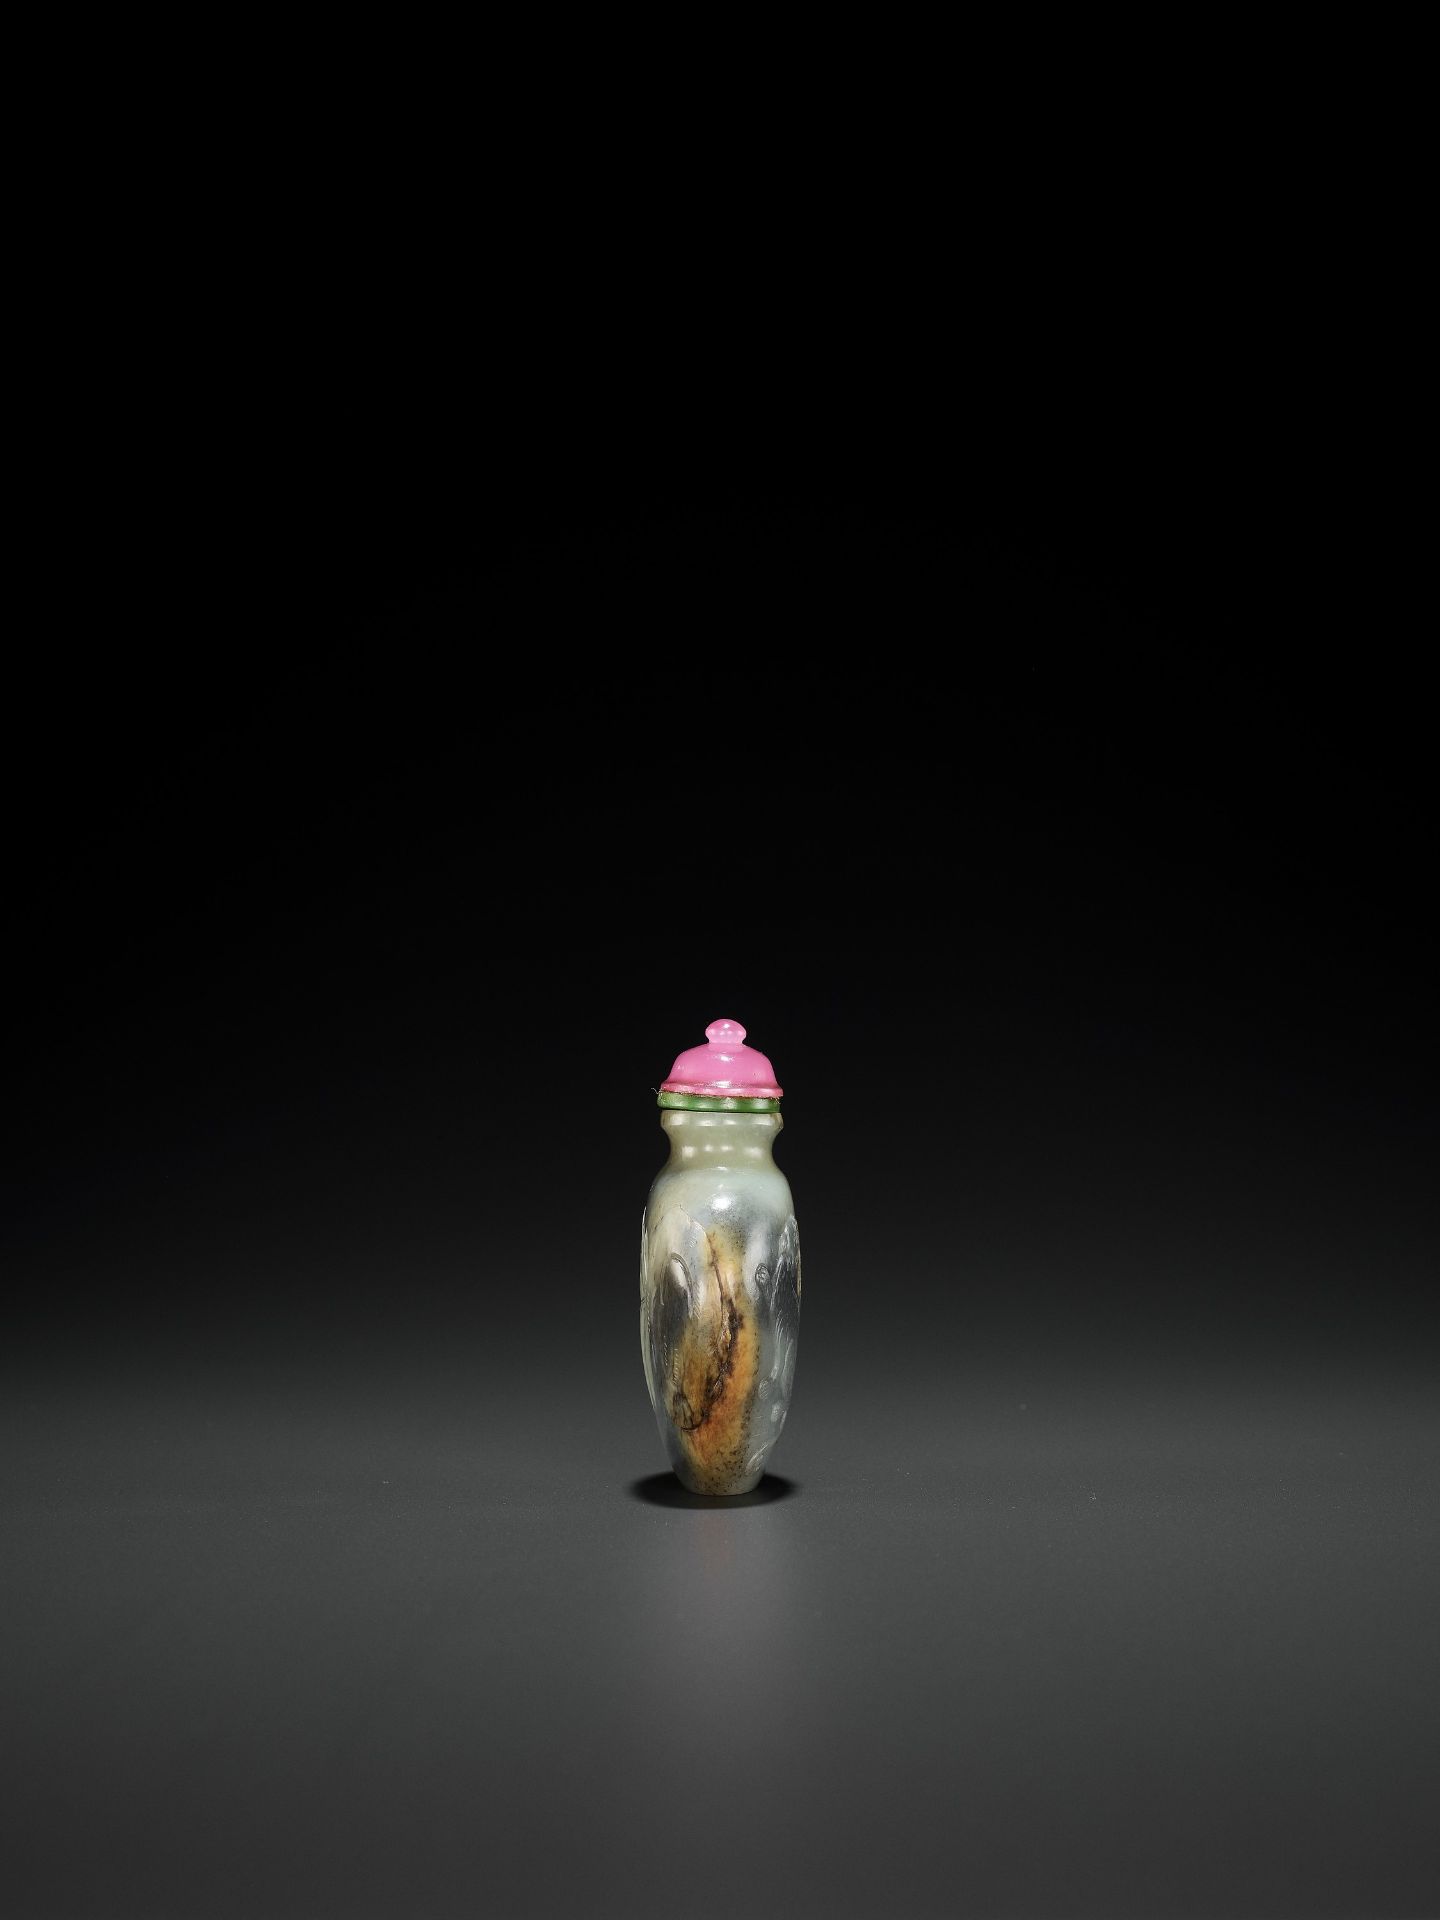 AN INSCRIBED WHITE, GRAY AND RUSSET JADEITE 'TIGER' SNUFF BOTTLE, SIGNATURE OF WANG HENG (1817-1882) - Image 6 of 8